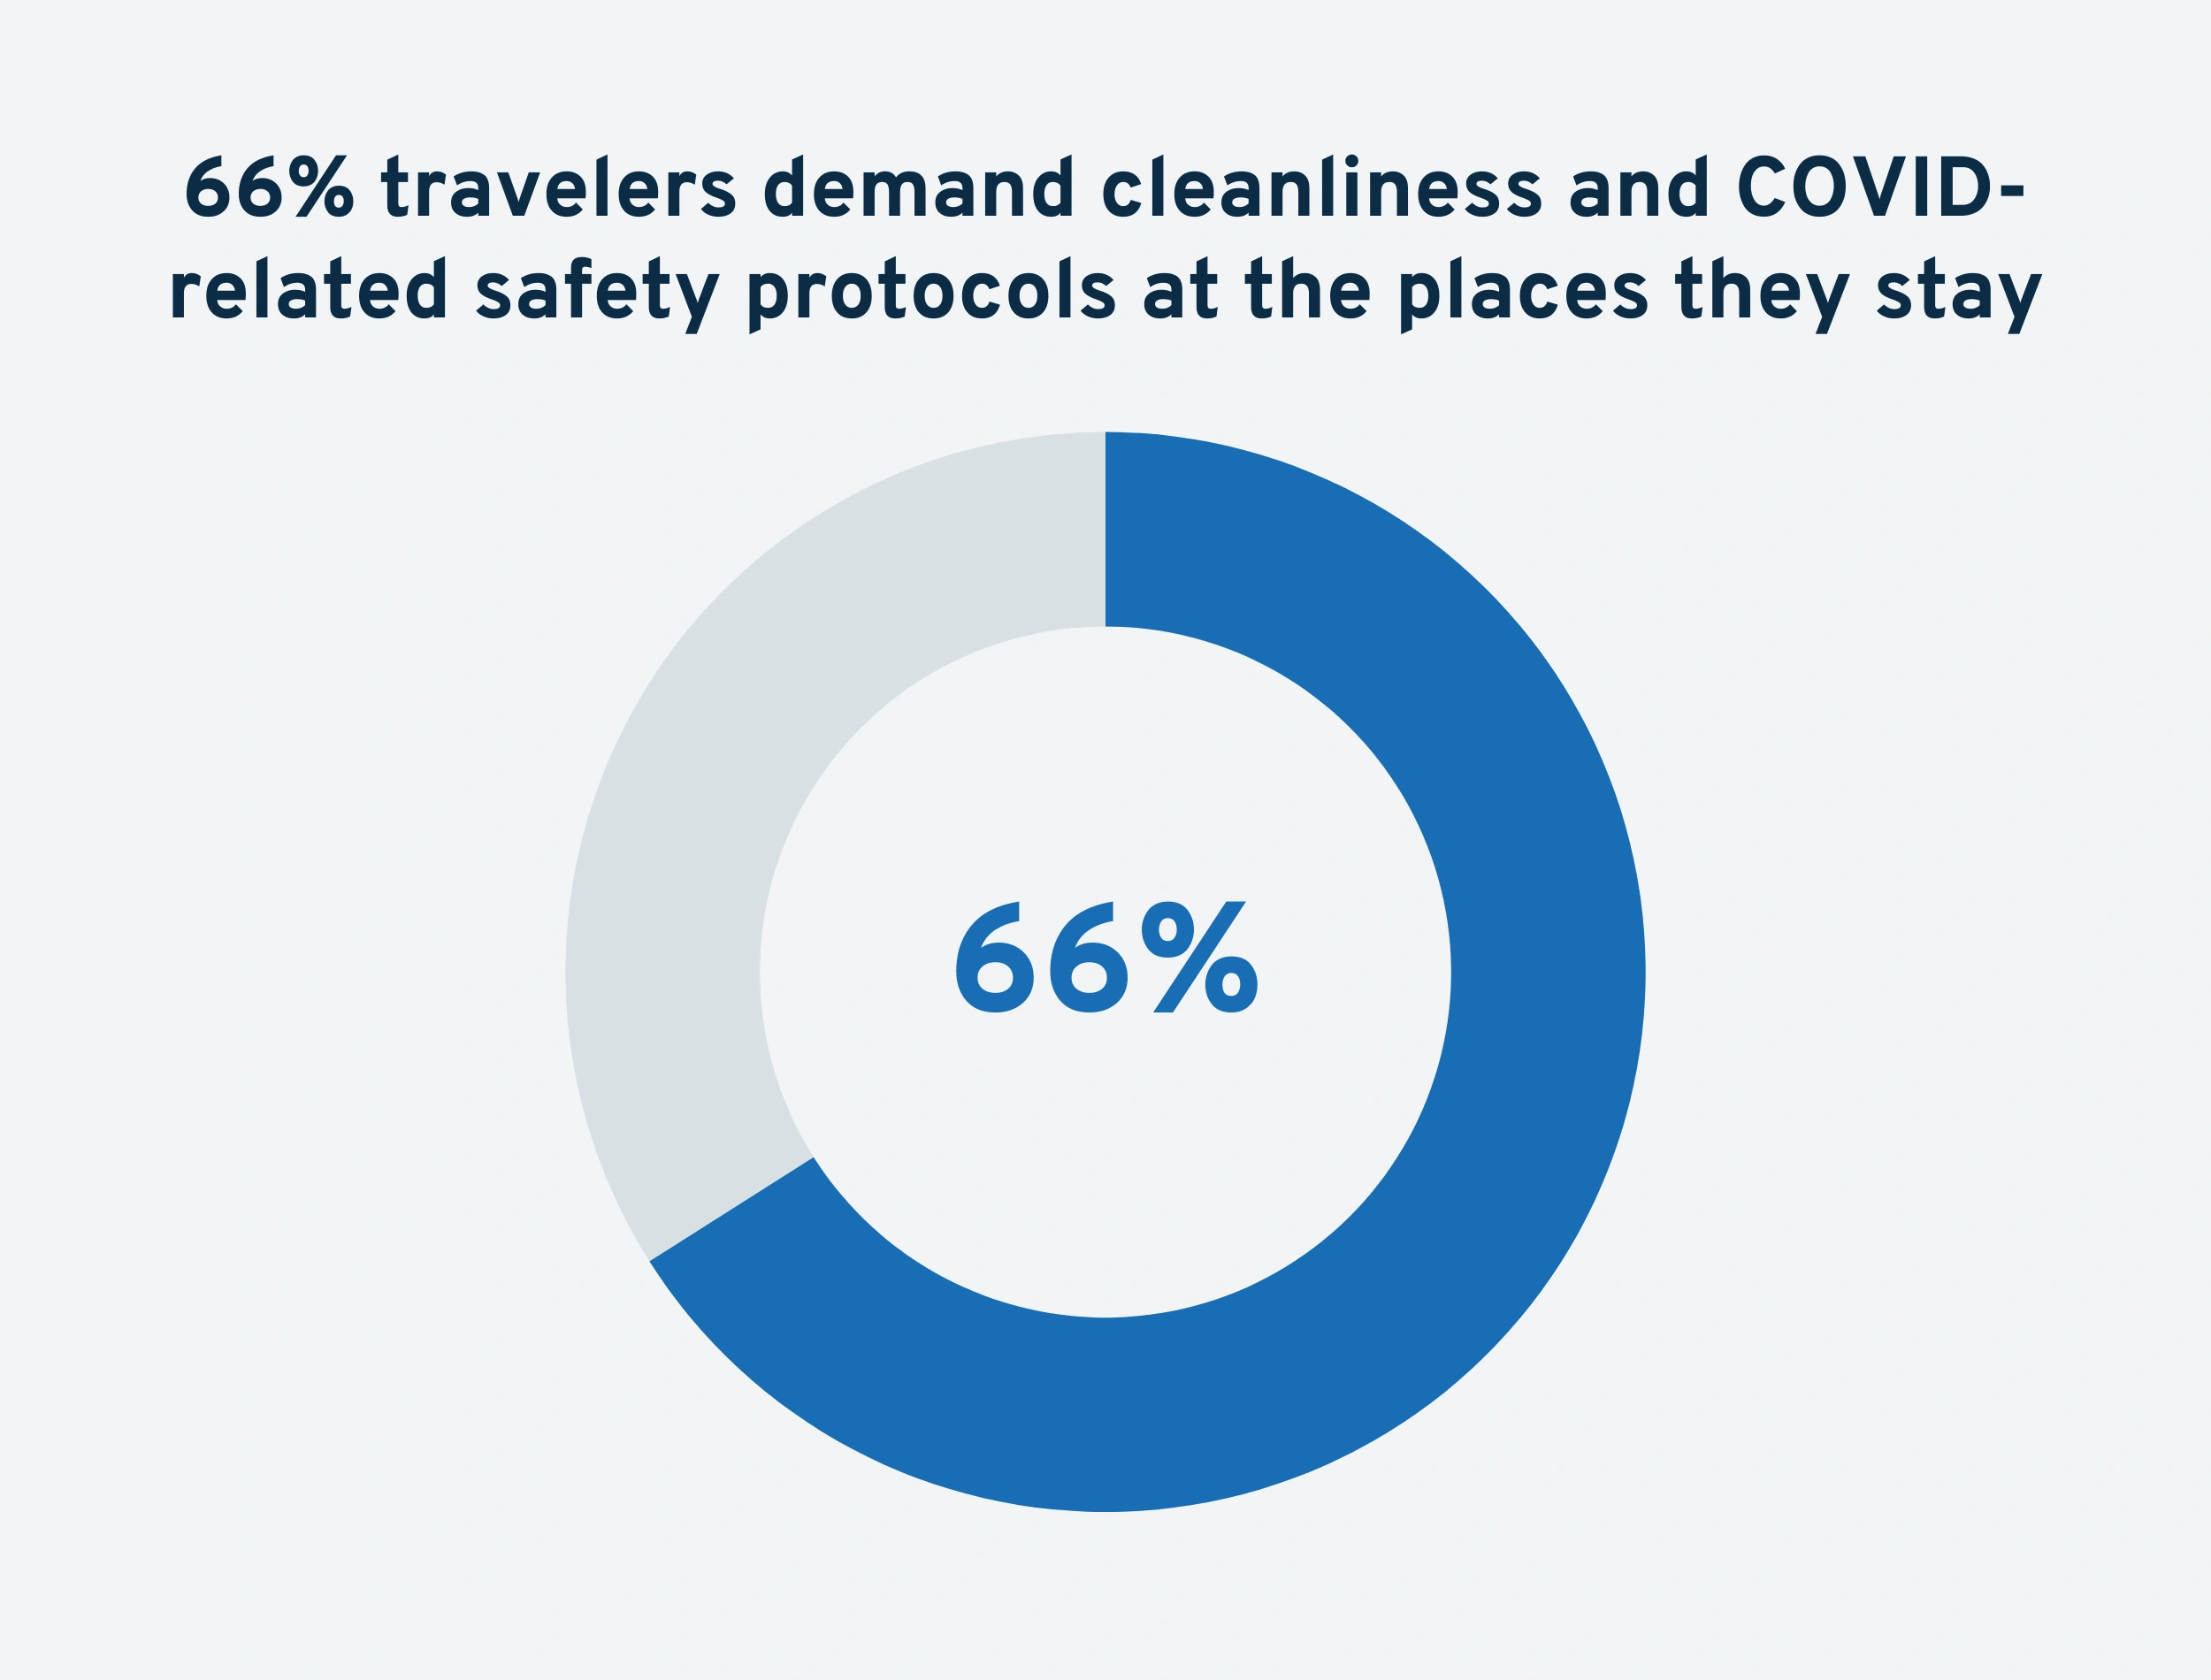 travelers-demand-cleanliness-min.png